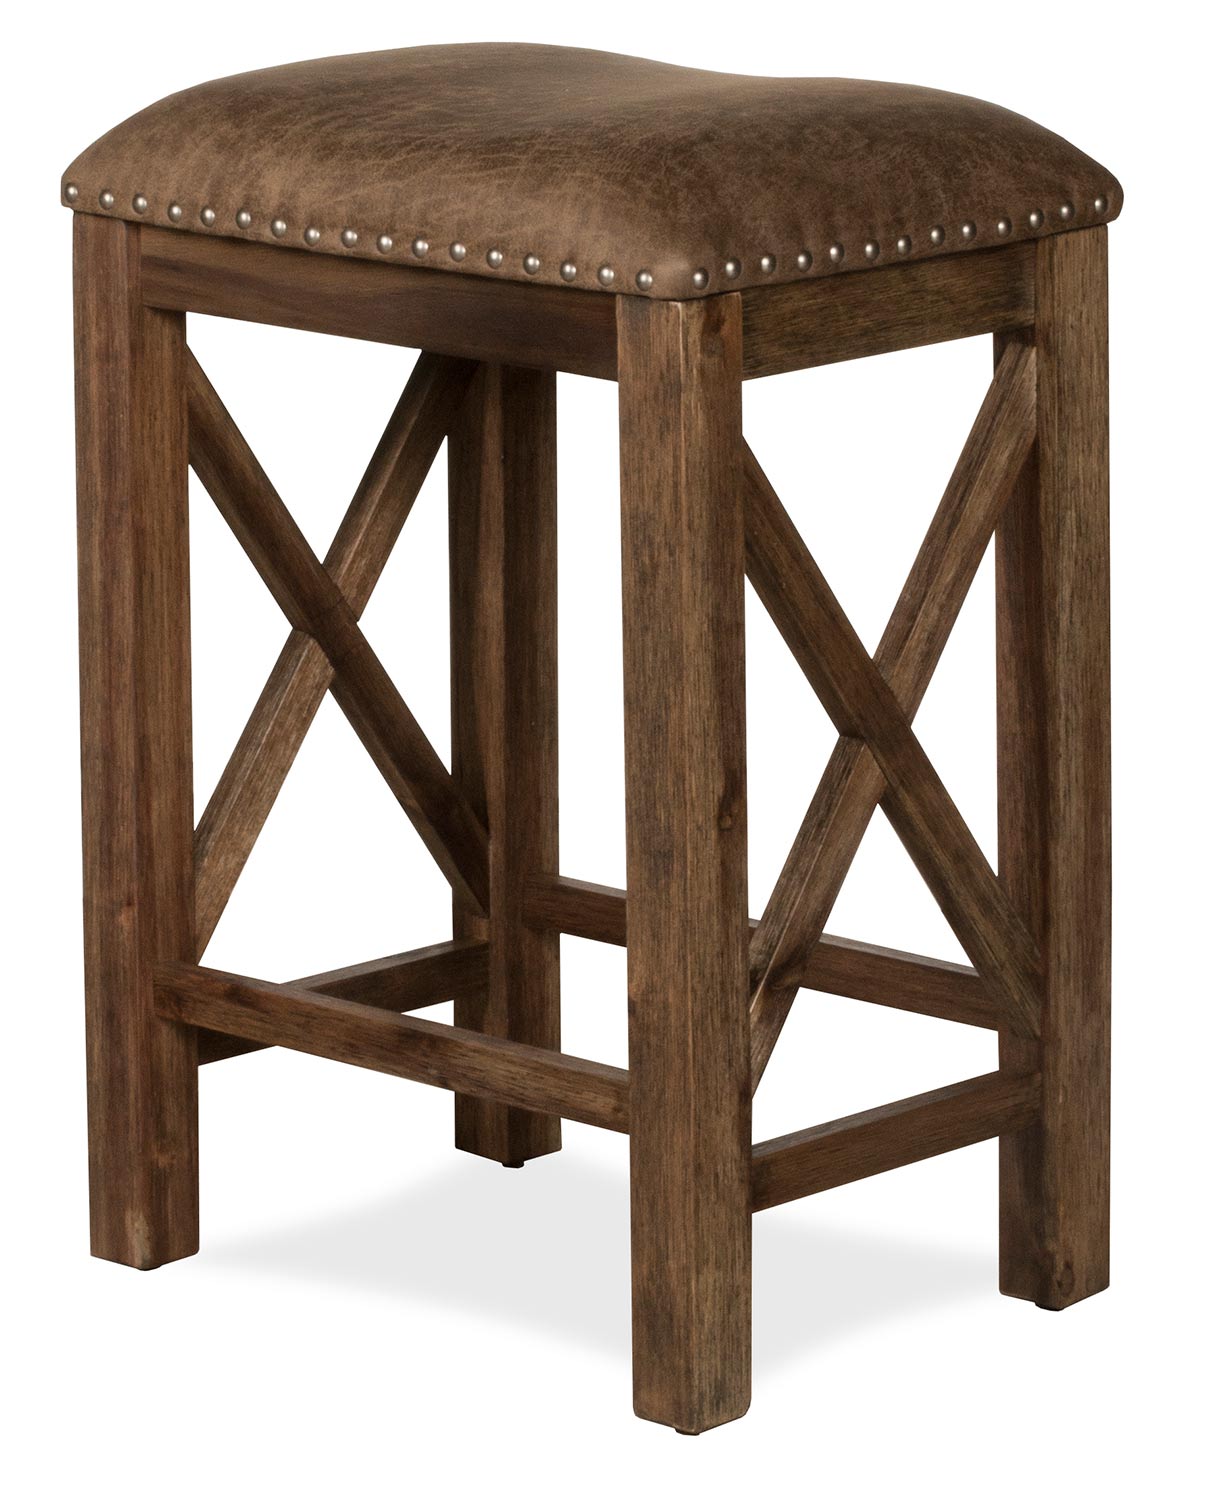 Hillsdale Willow Bend Stationary Counter Height Stool - Antique Brown Walnut